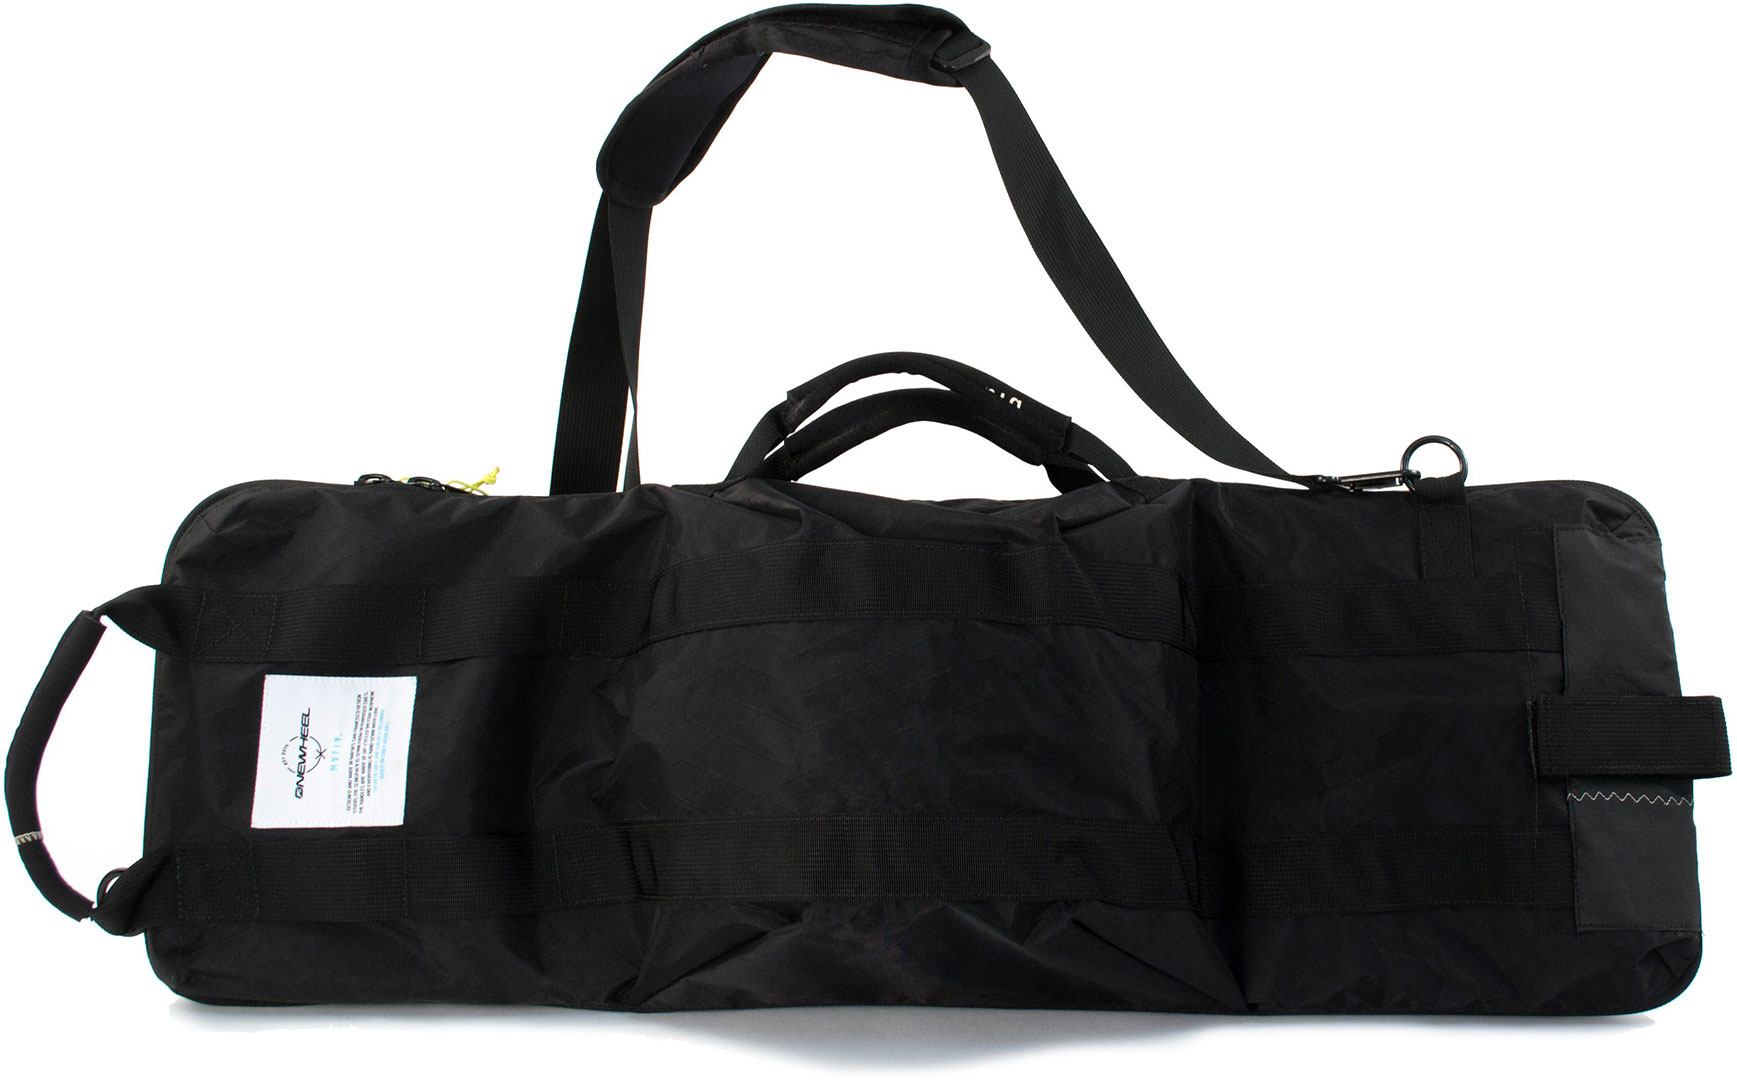 World Famous Designer Makes Bag From Waste — Brilliantly Made